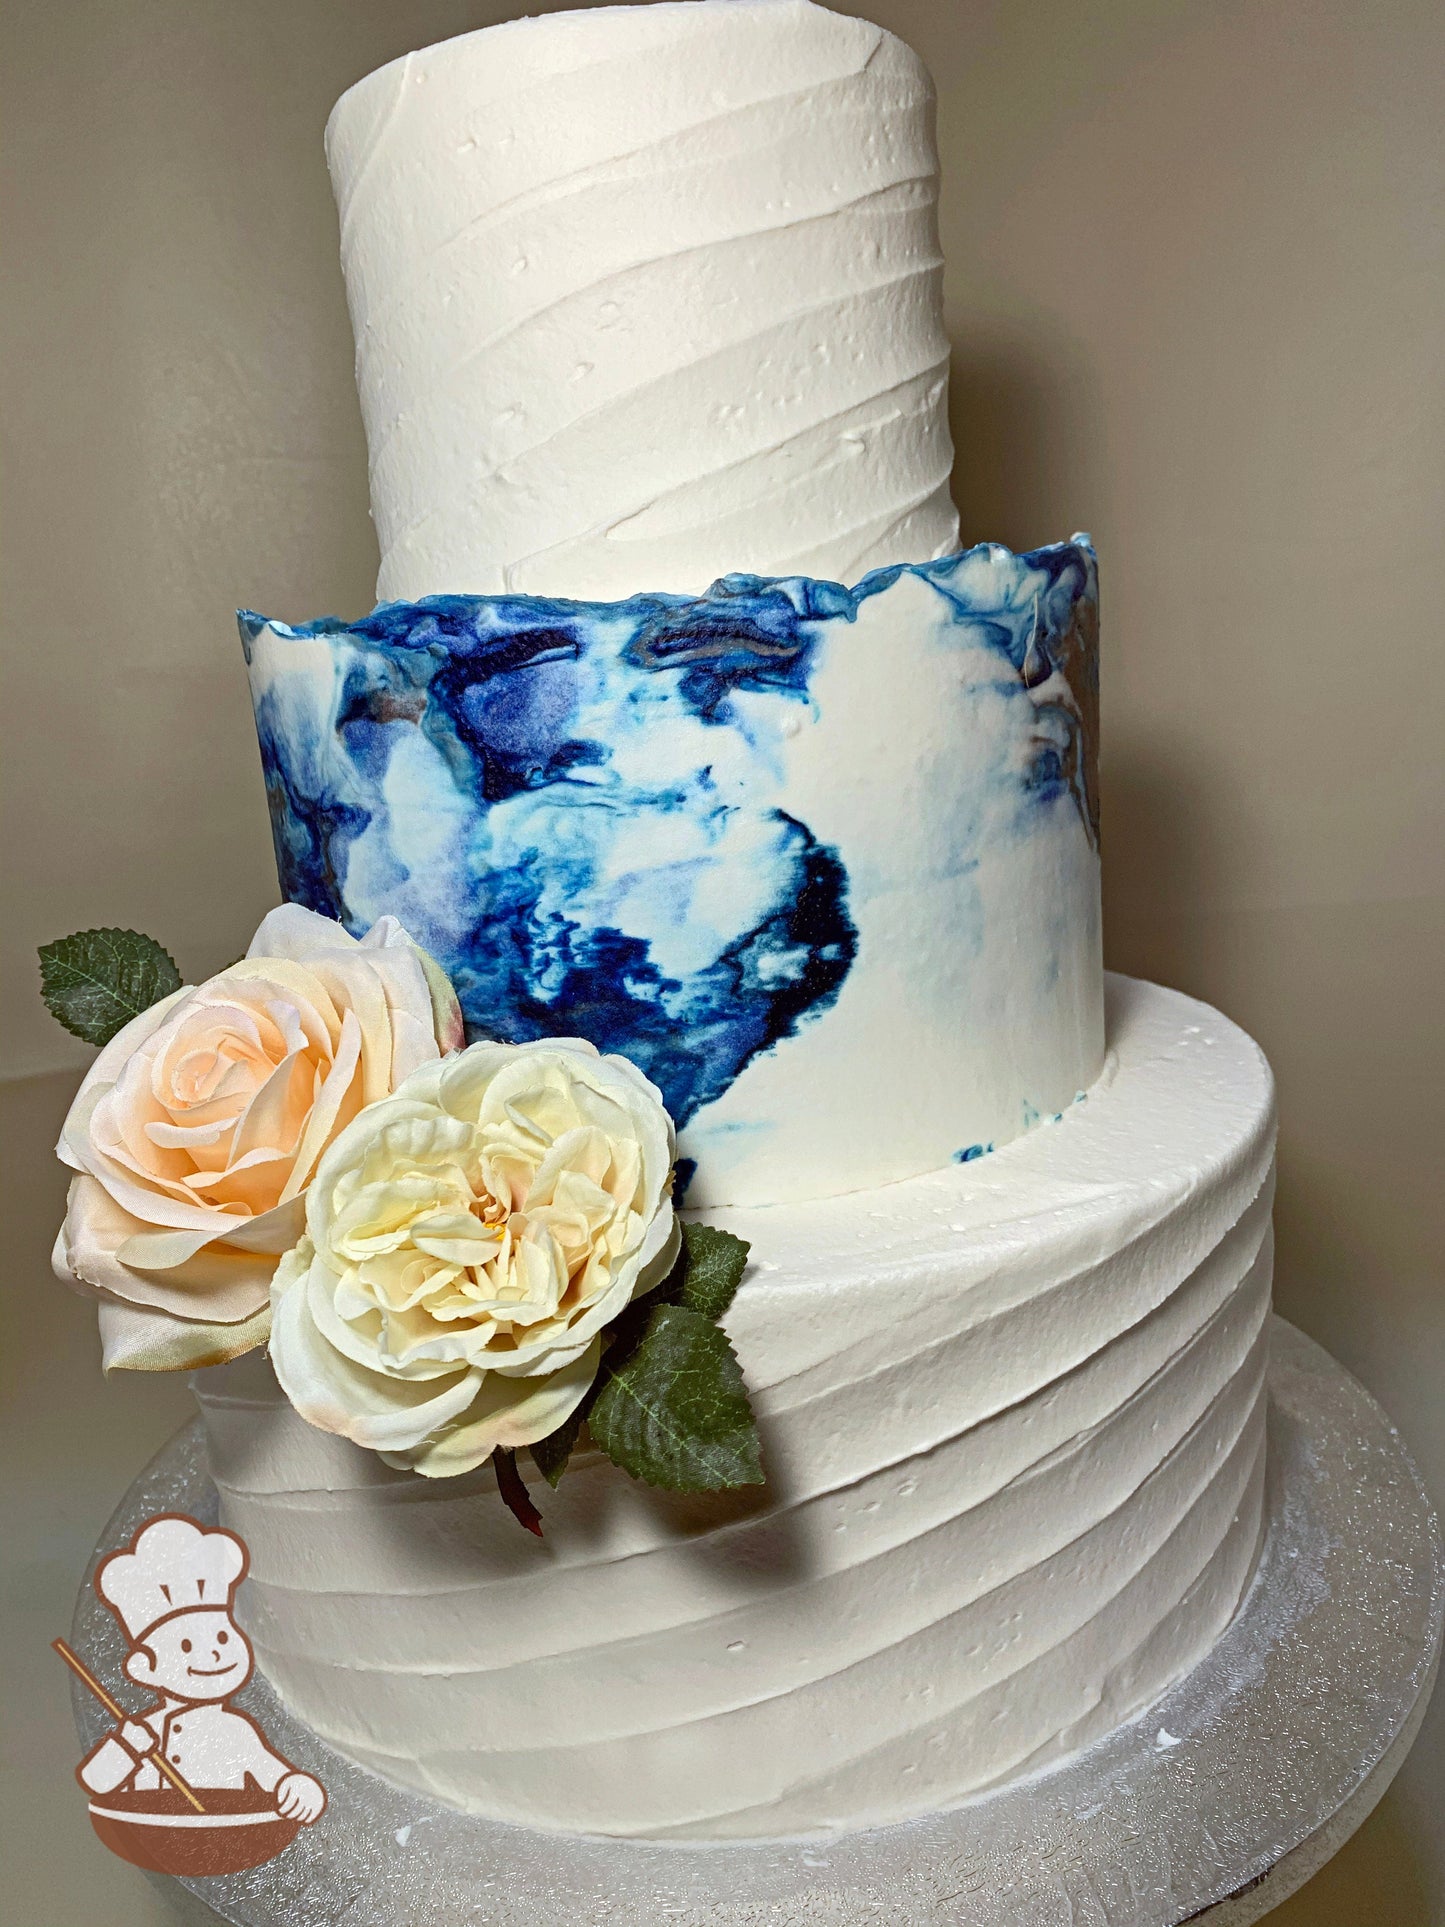 3-tier cake with decorated with a diagonal angle texture on the bottom and top tier, and the middle tier has a blue marble buttercream texture.